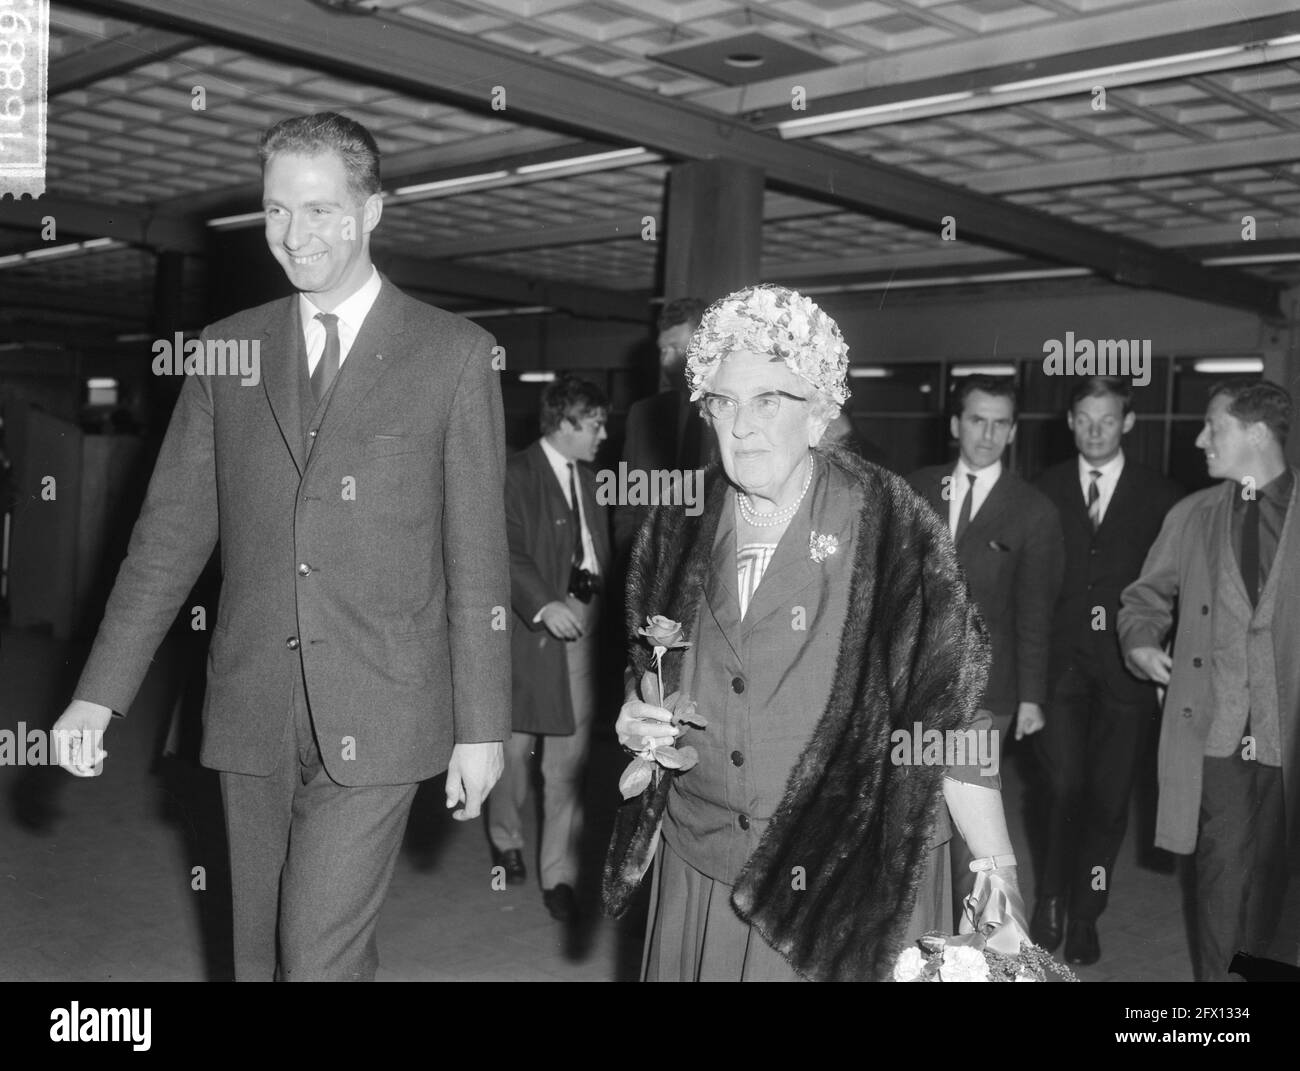 Agatha Christie in the Netherlands (detective writer), upon arrival at Schiphol Airport with rose in her hand, September 17, 1964, arrivals, The Netherlands, 20th century press agency photo, news to remember, documentary, historic photography 1945-1990, visual stories, human history of the Twentieth Century, capturing moments in time Stock Photo